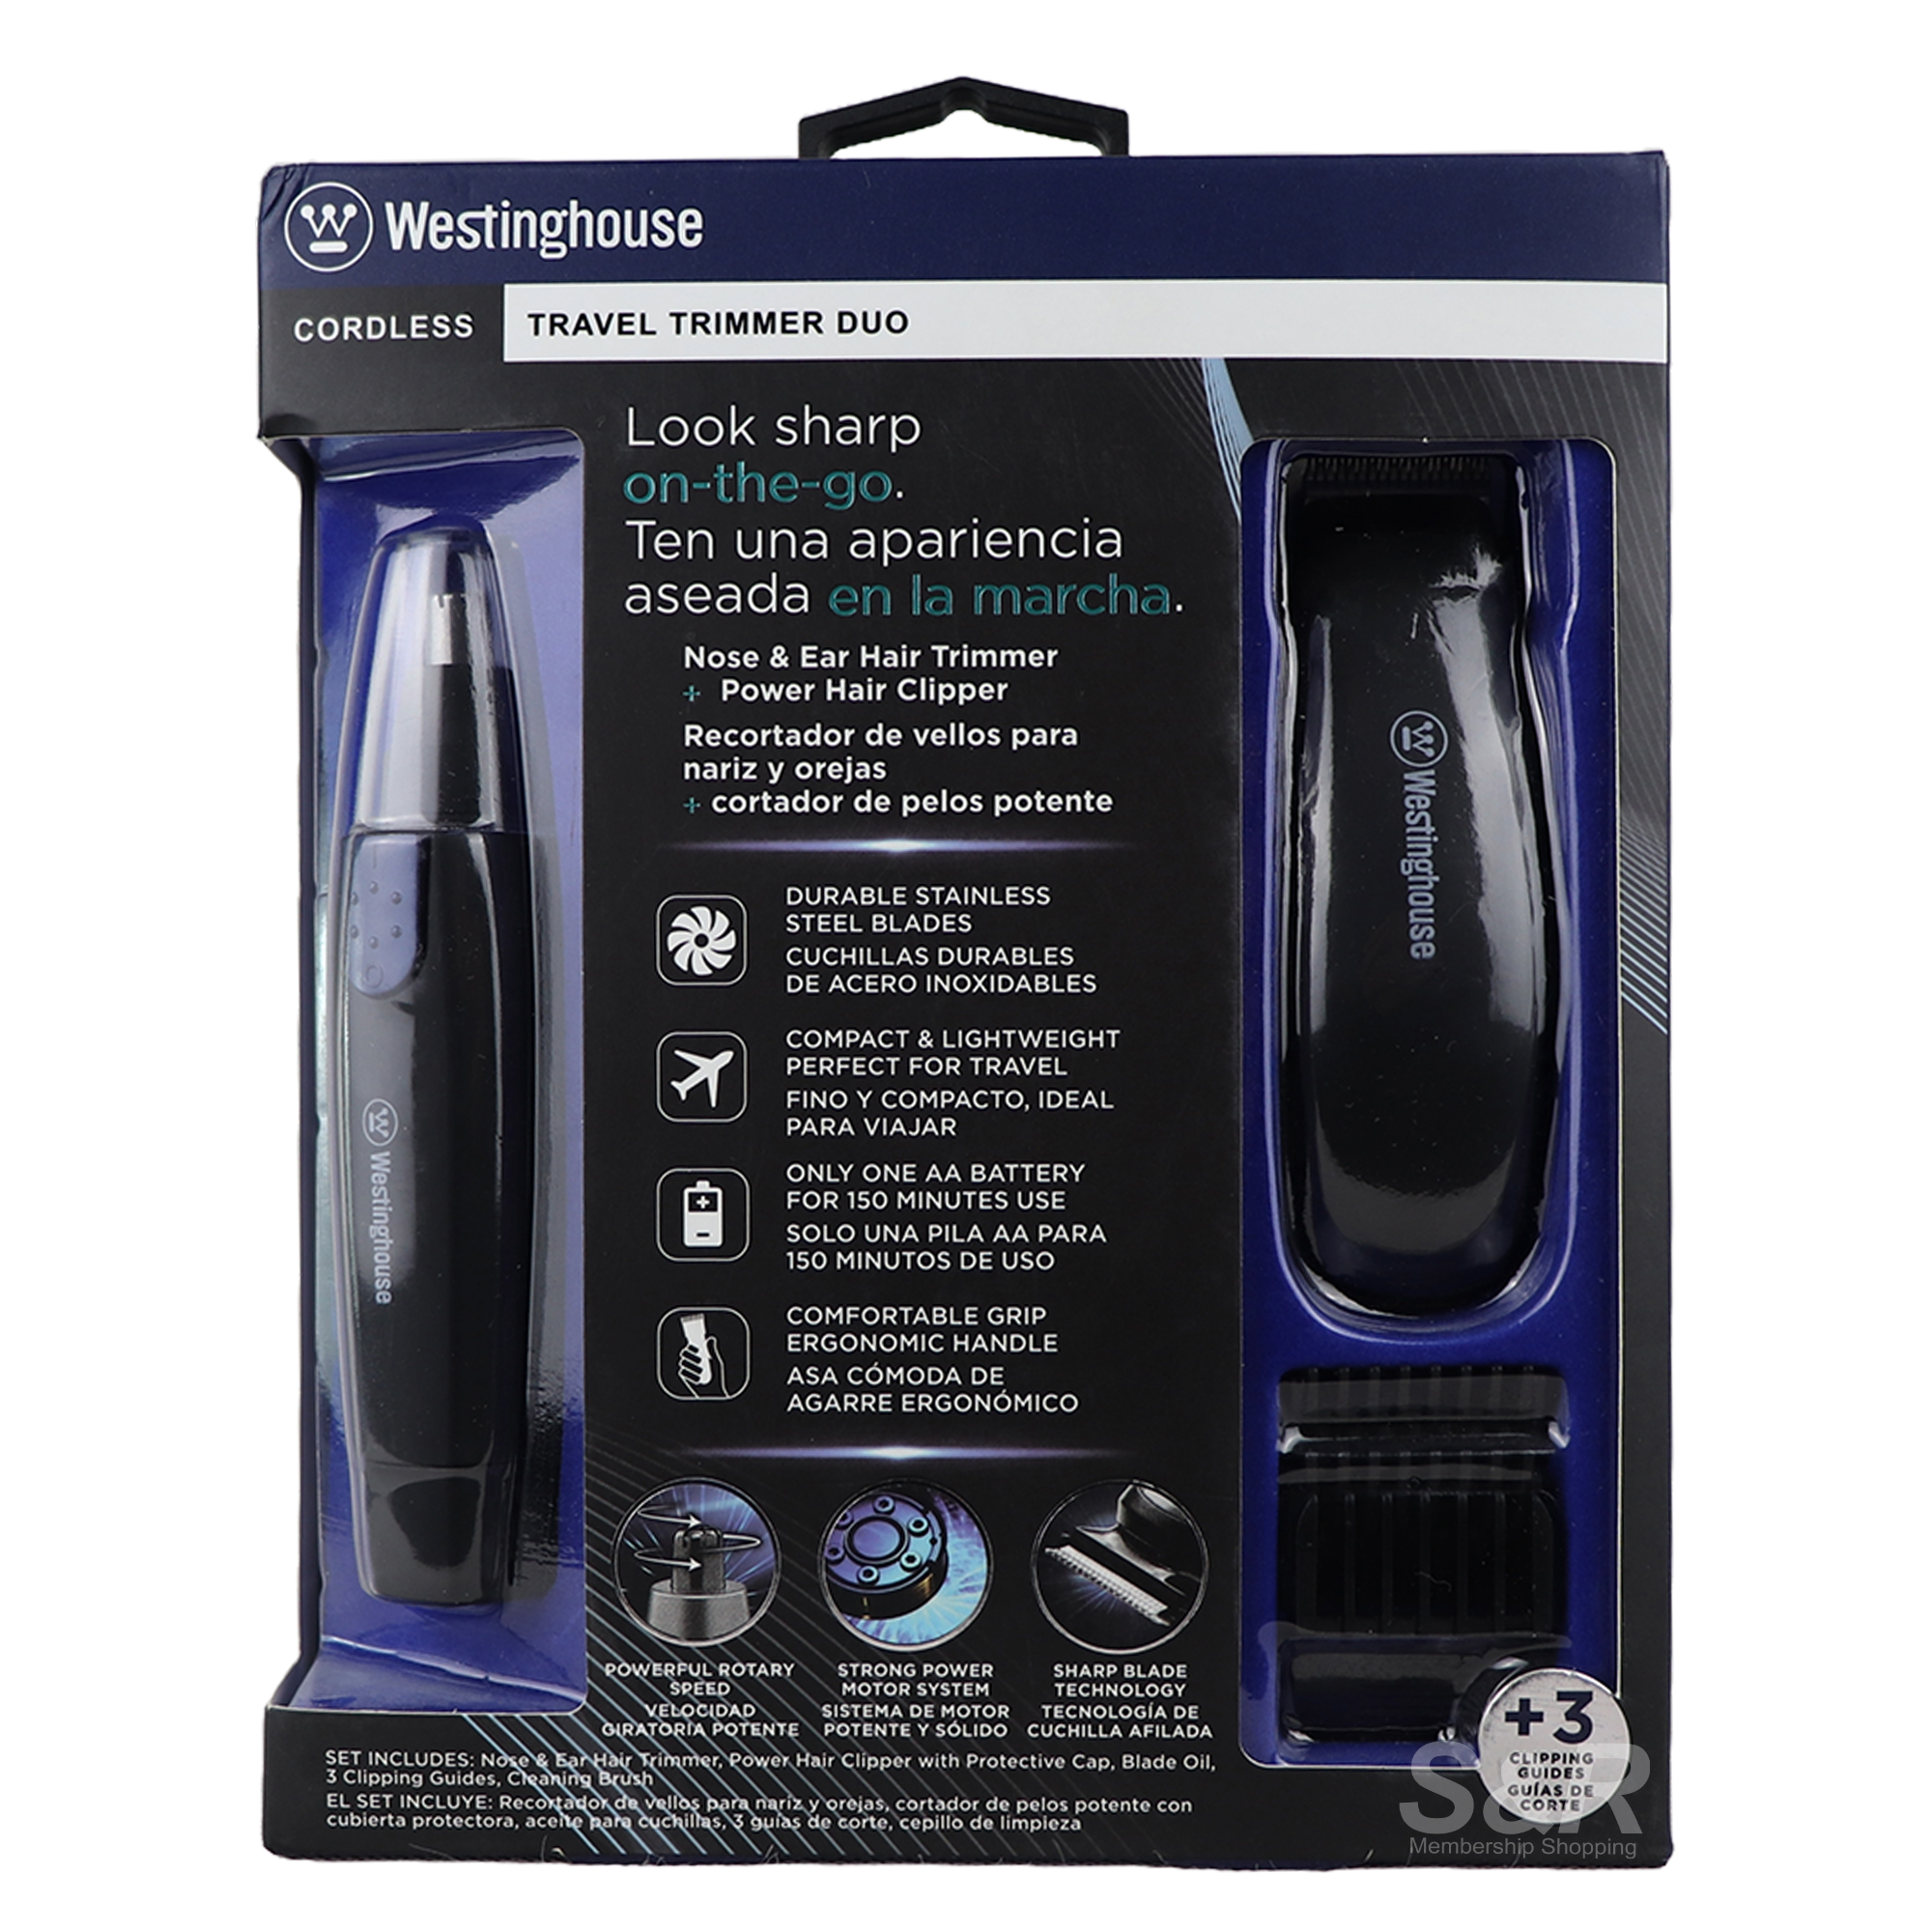 Westinghouse Travel Cordless Trimmer Duo